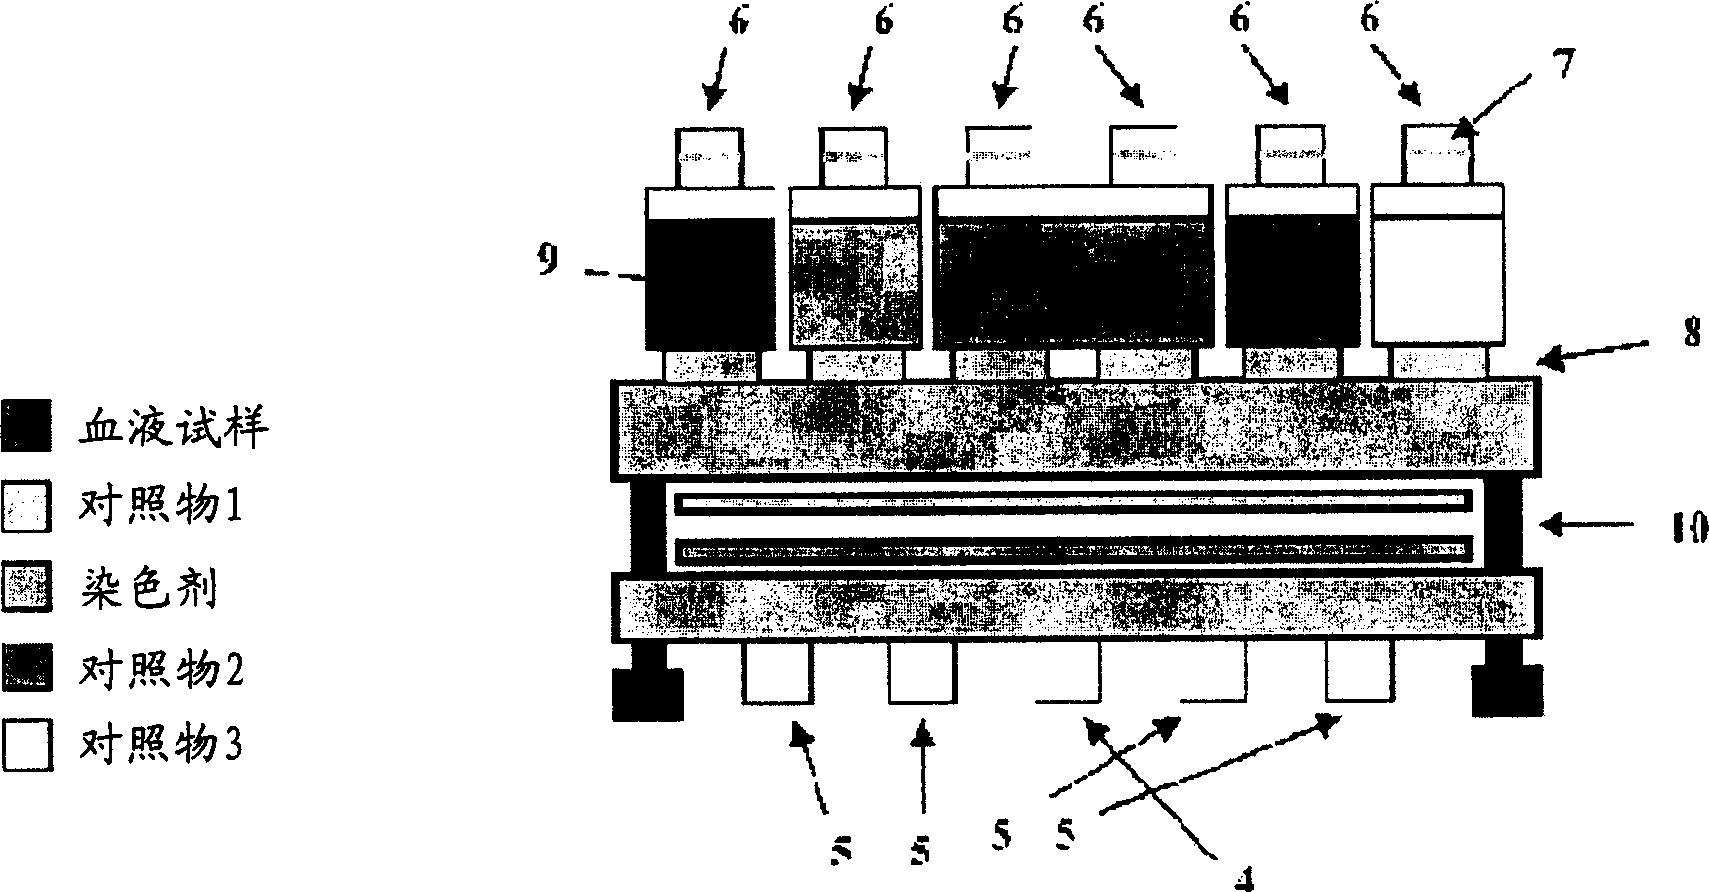 Automatic fluid device for detecting protein in biological sample and its method